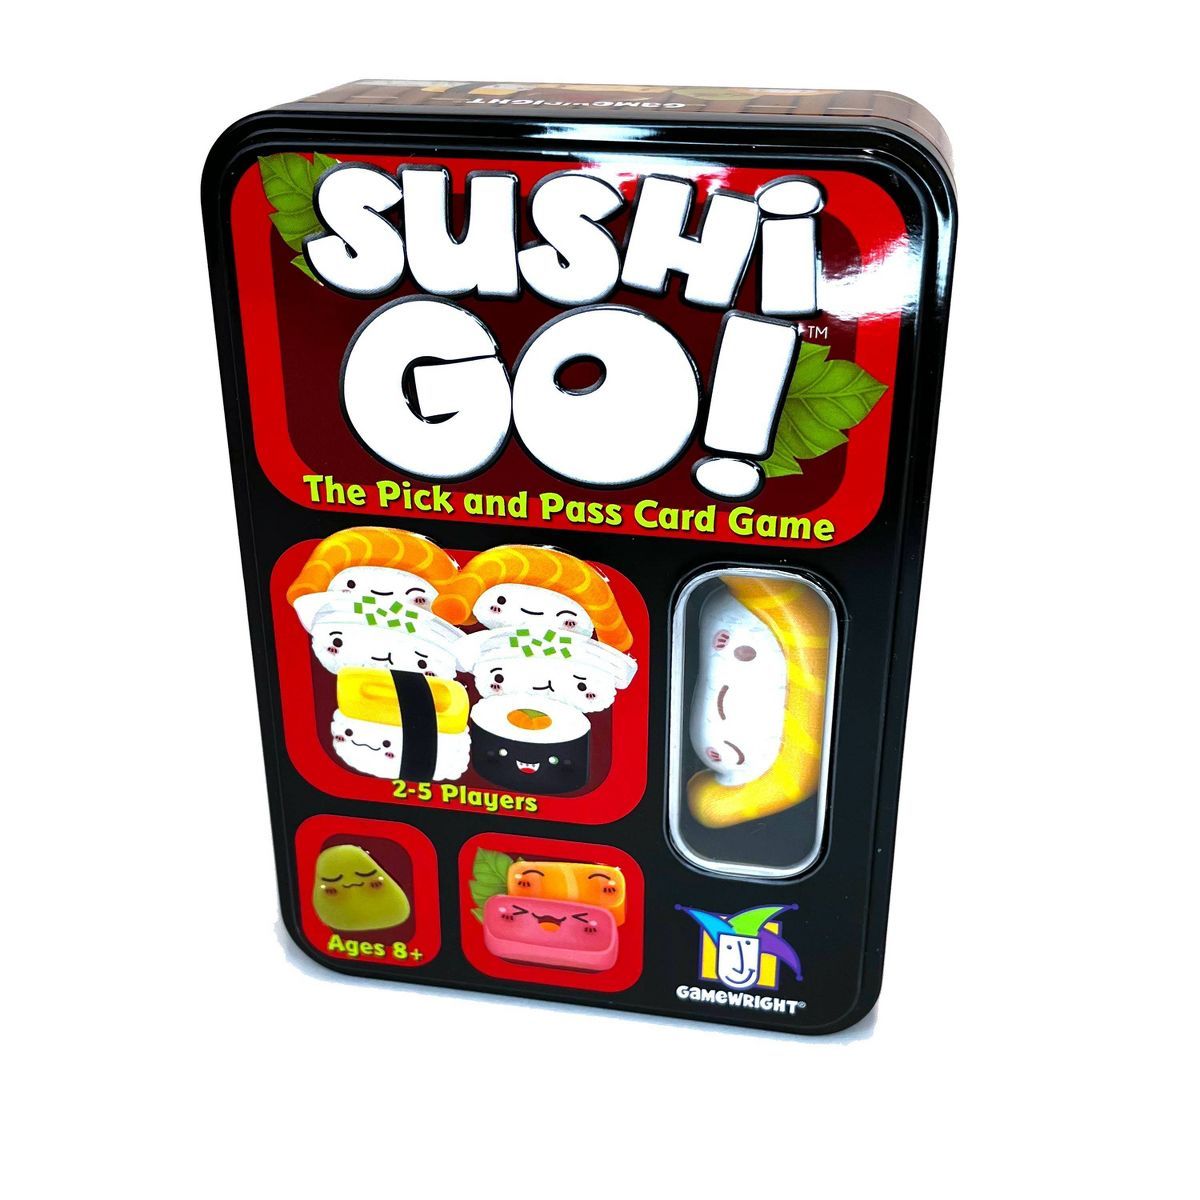 Gamewright Sushi Go with Squishy Card Game | Target